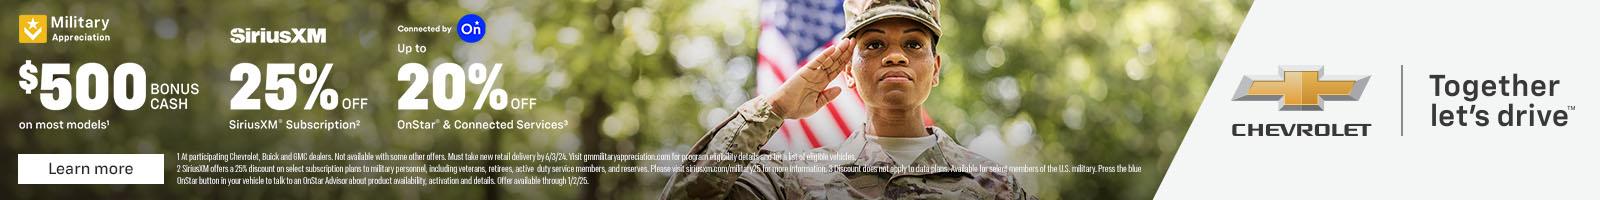 Military appreciation. For those who put their lives on the line. $500 BONUS CASH on most models. 25% off SiriusXM Subscription. Up to 20% off OnStar & Connected Services.